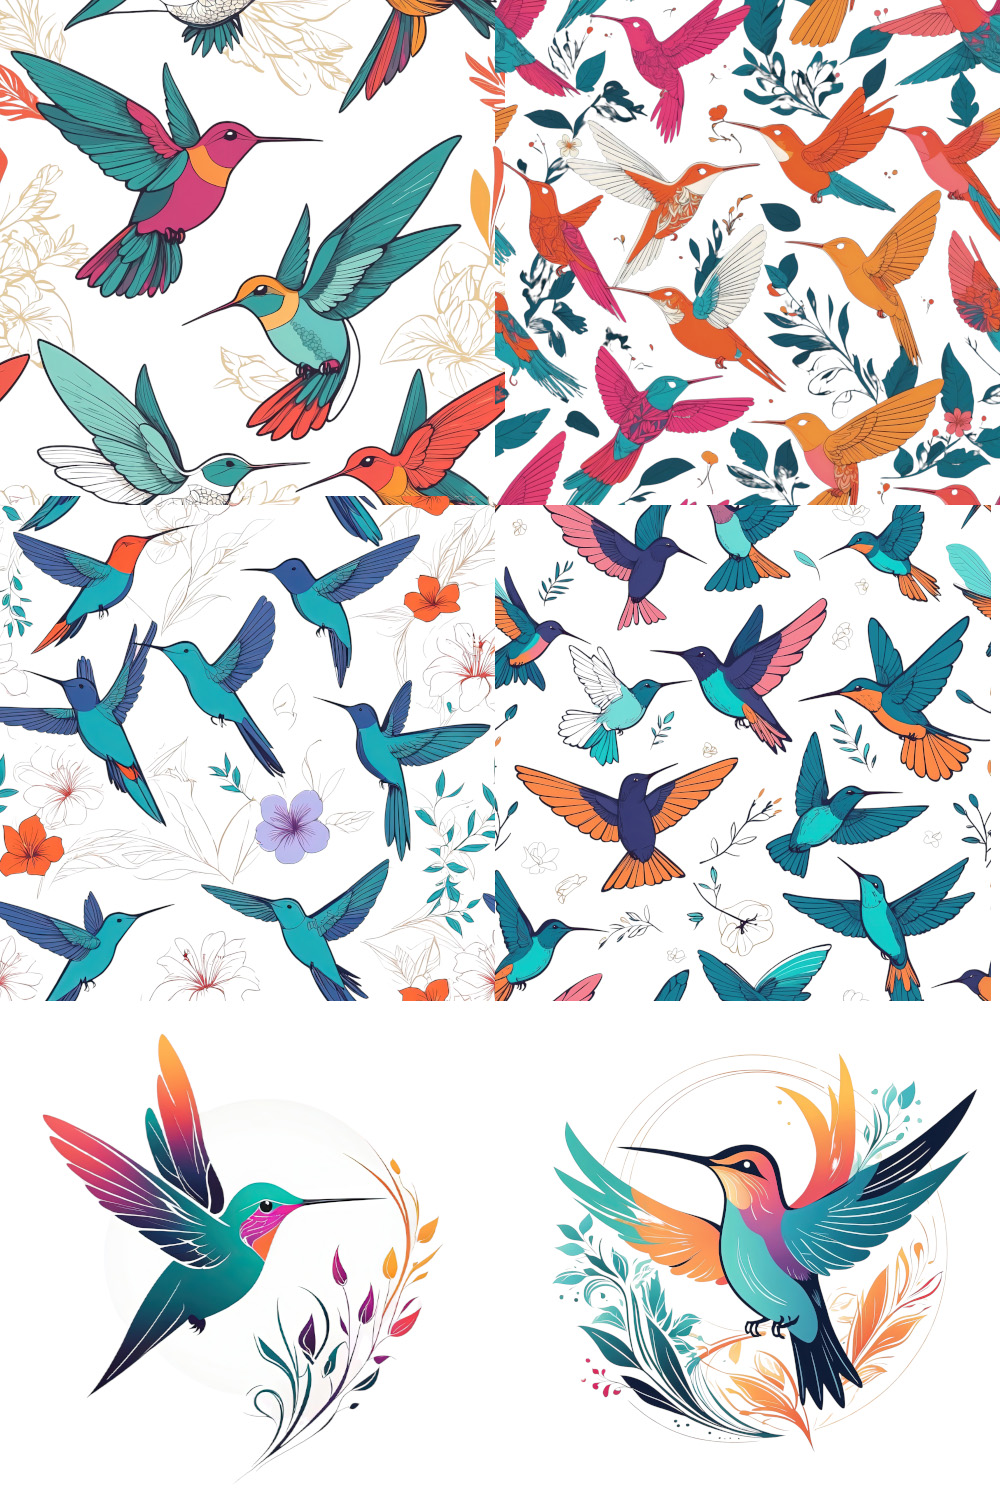 Colibri birds with floral leaves in boho style design bundle pinterest preview image.